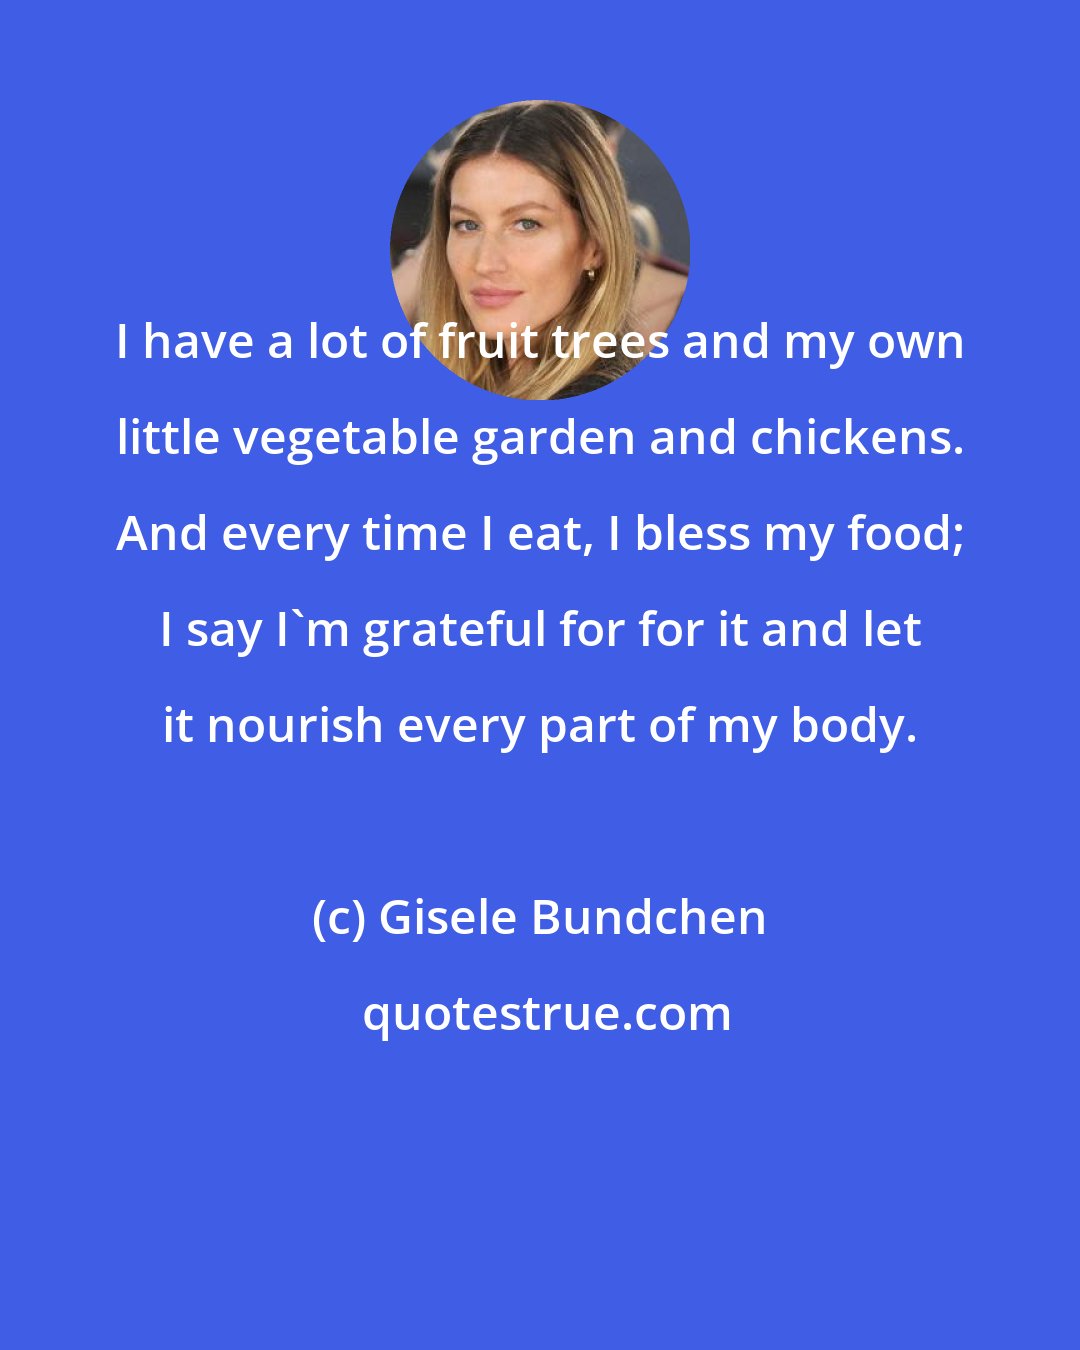 Gisele Bundchen: I have a lot of fruit trees and my own little vegetable garden and chickens. And every time I eat, I bless my food; I say I'm grateful for for it and let it nourish every part of my body.